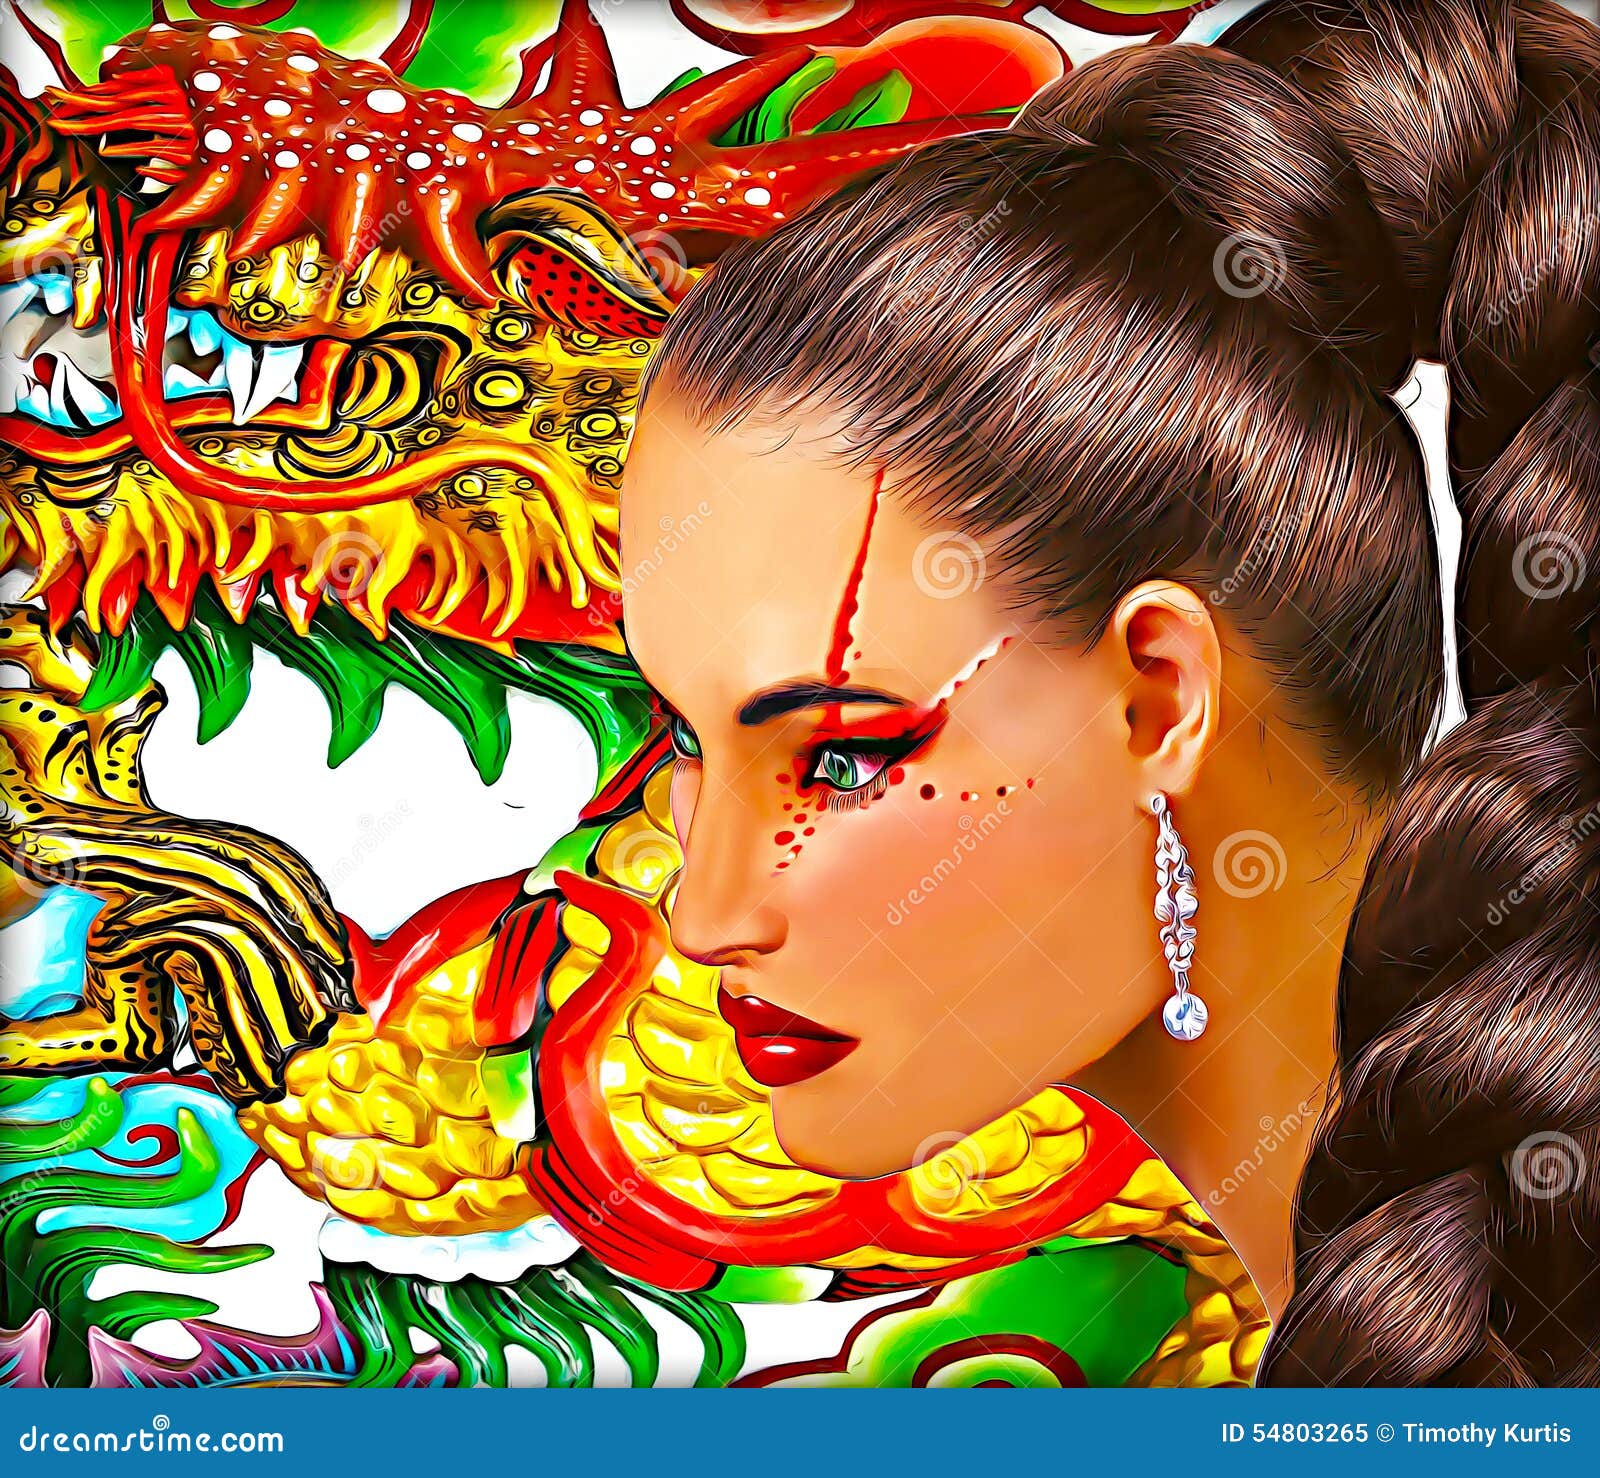 Asian Woman with Dragon Background Long Pony Tail Hairstyle and Colorful  Makeup Stock Image  Image of attractive cosmetics 54803265